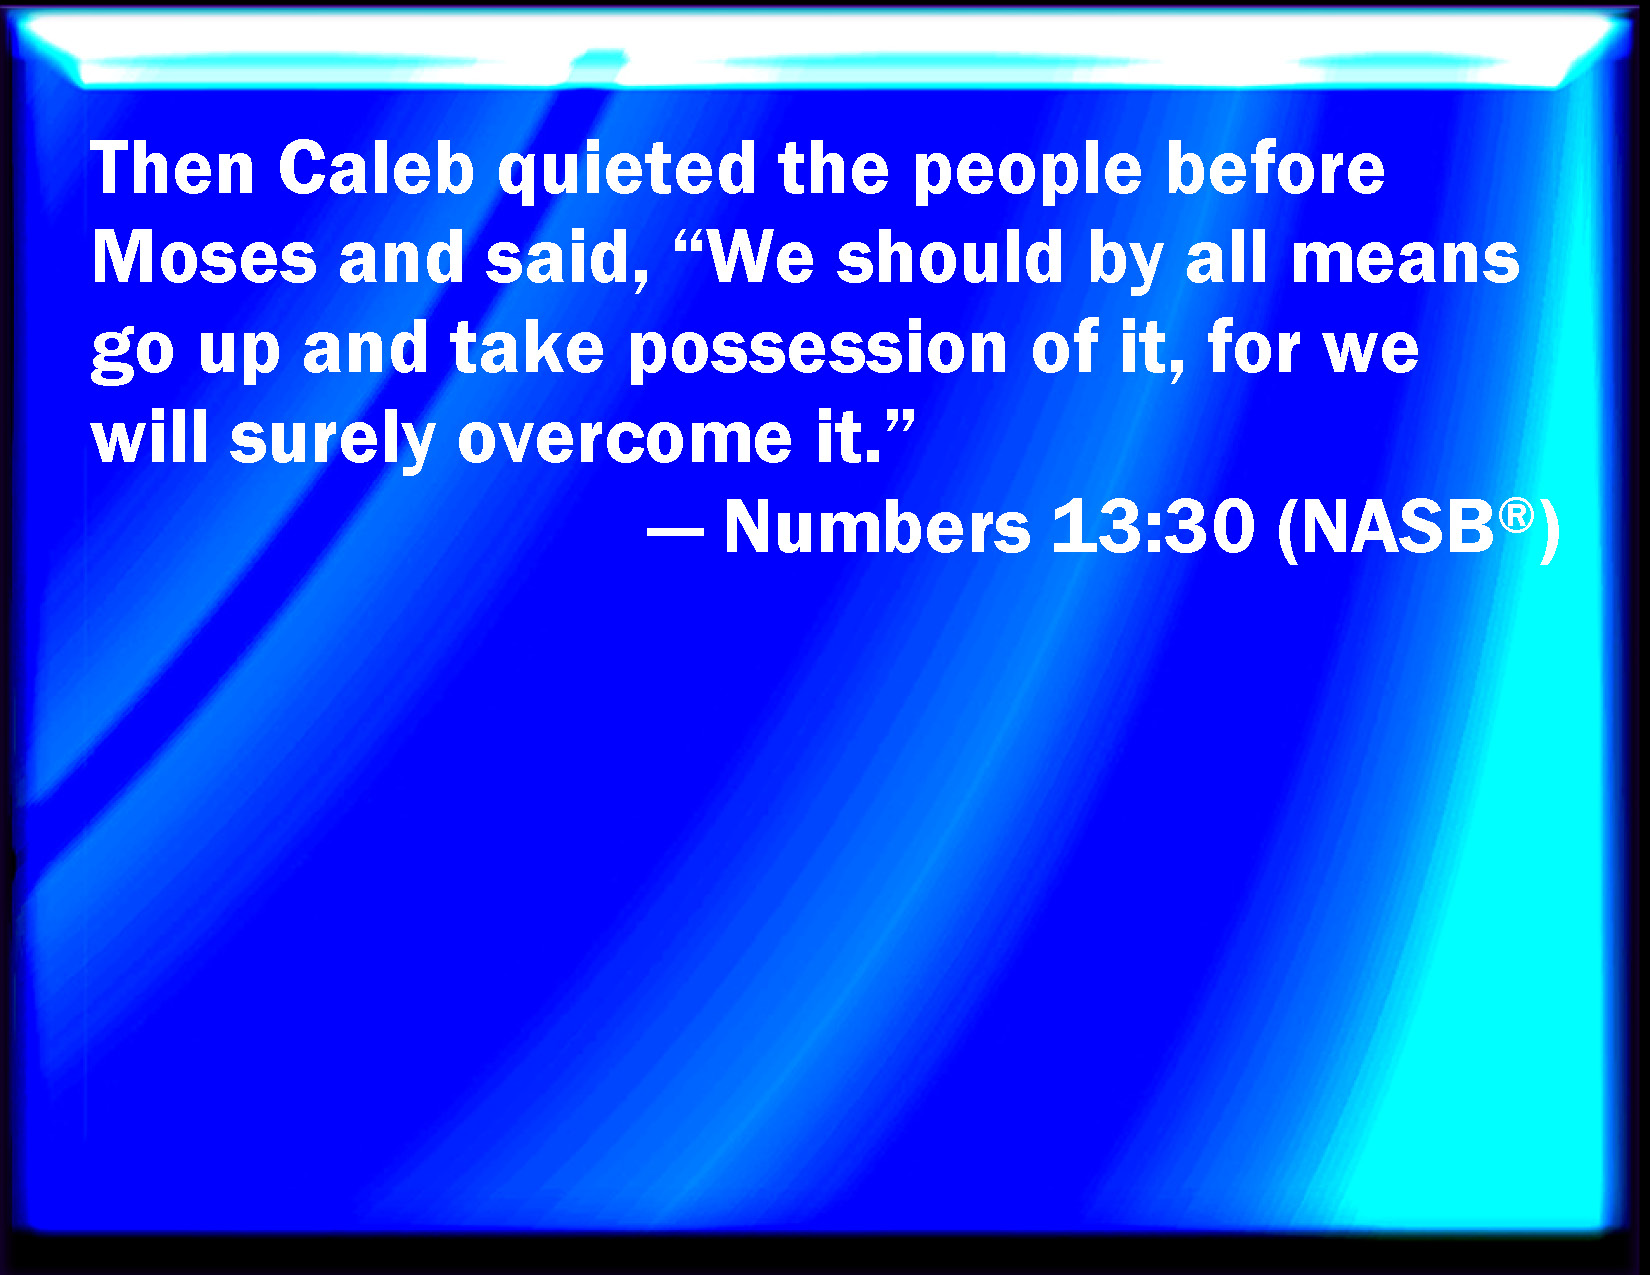 numbers-13-30-and-caleb-stilled-the-people-before-moses-and-said-let